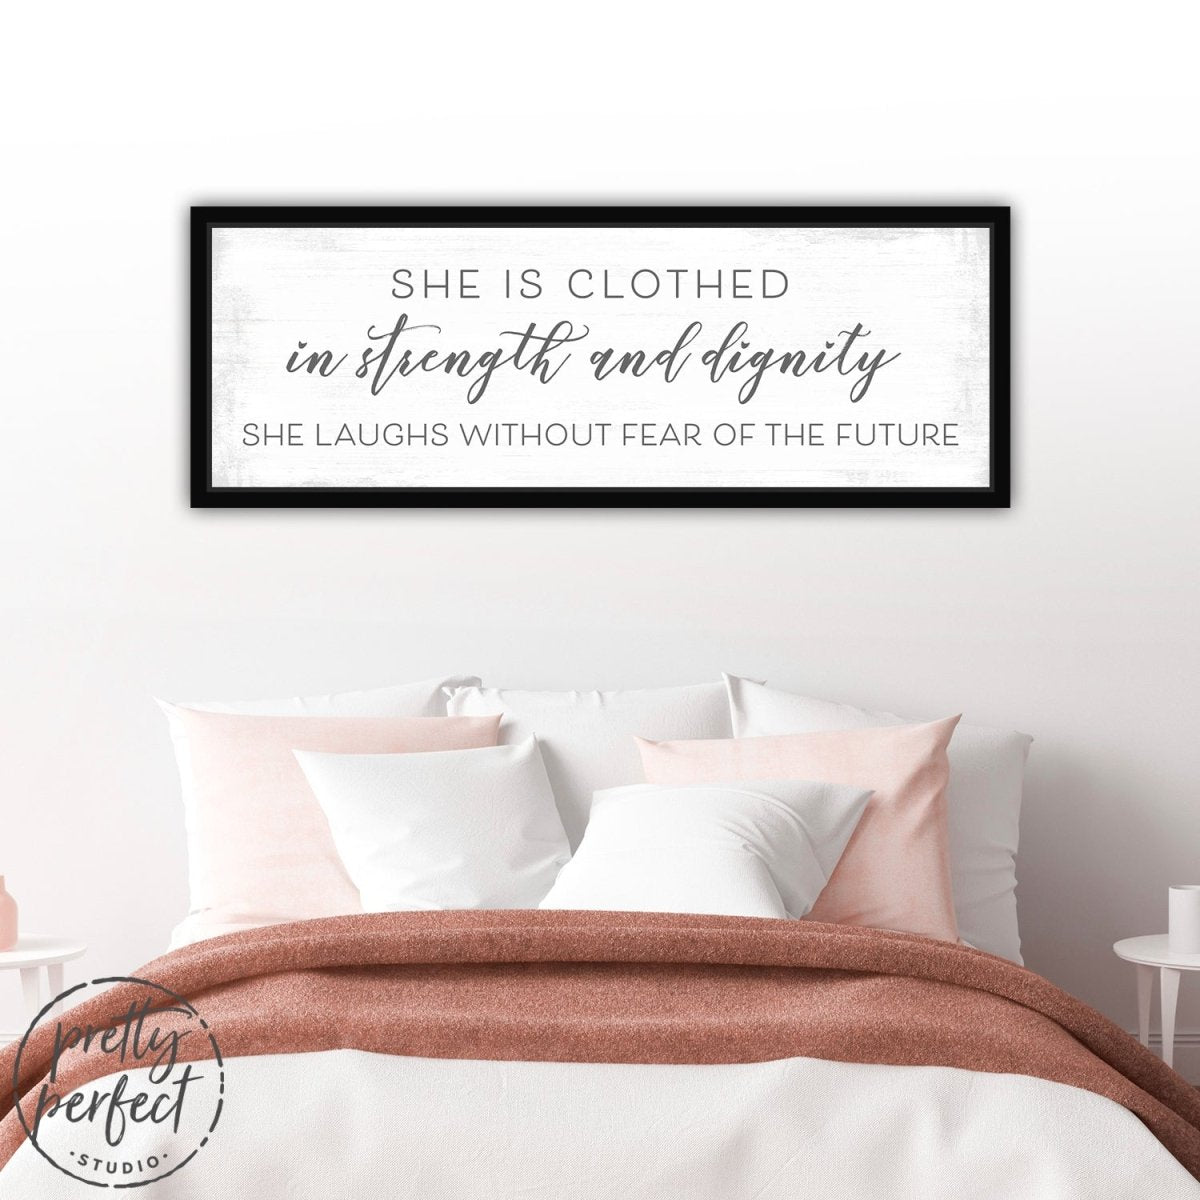 She Is Clothed In Strength and Dignity Sign Above Bed - Pretty Perfect Studio